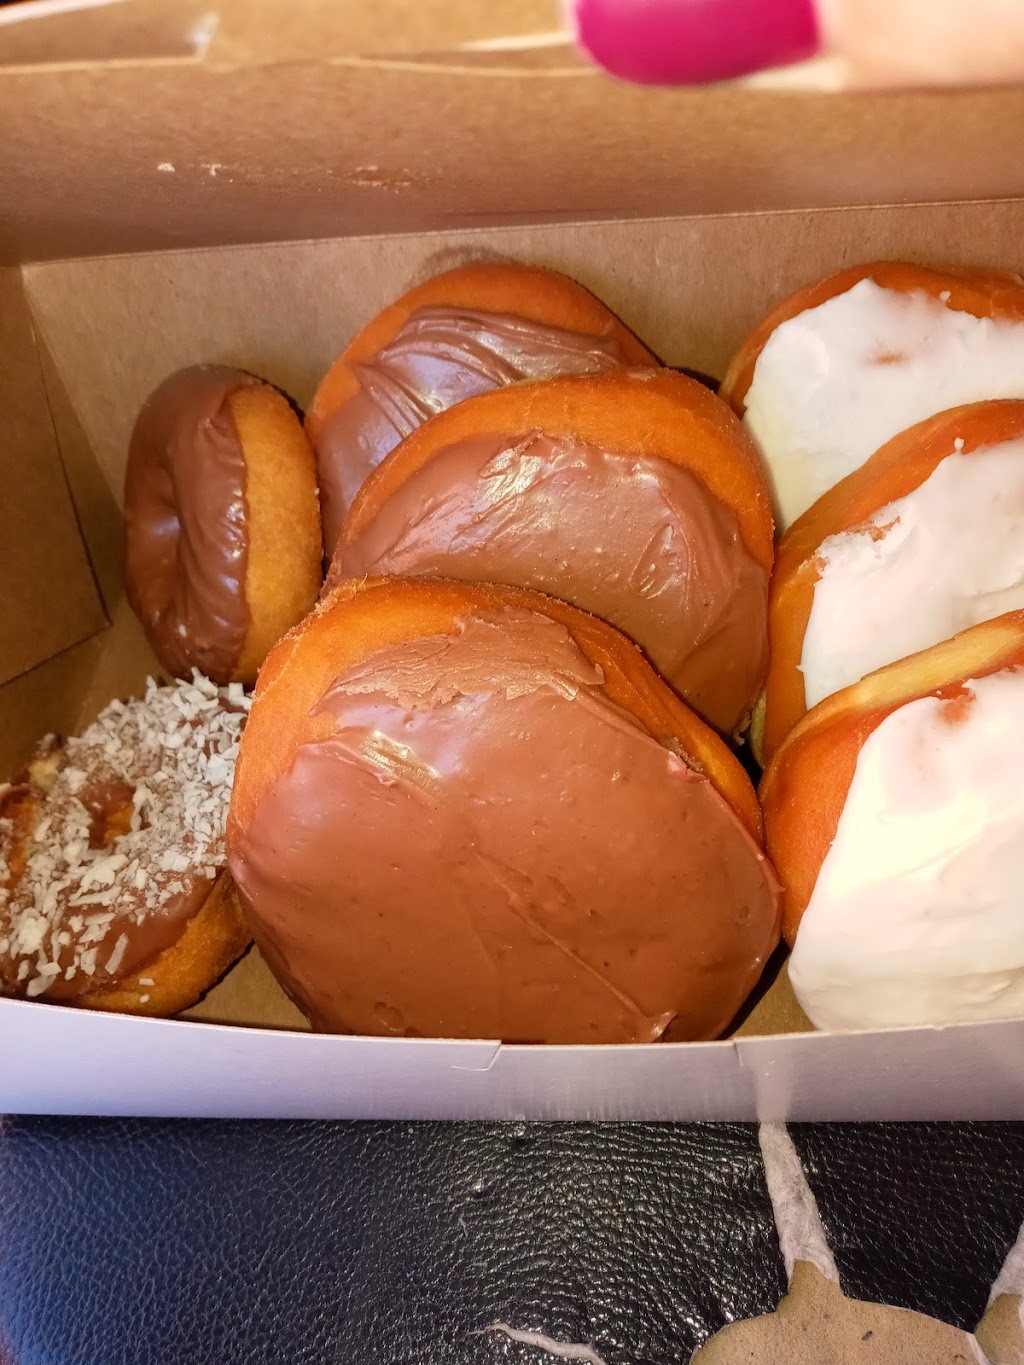 Martins Donuts | 4 W State St, Trenton, OH 45067 | Phone: (513) 988-0883